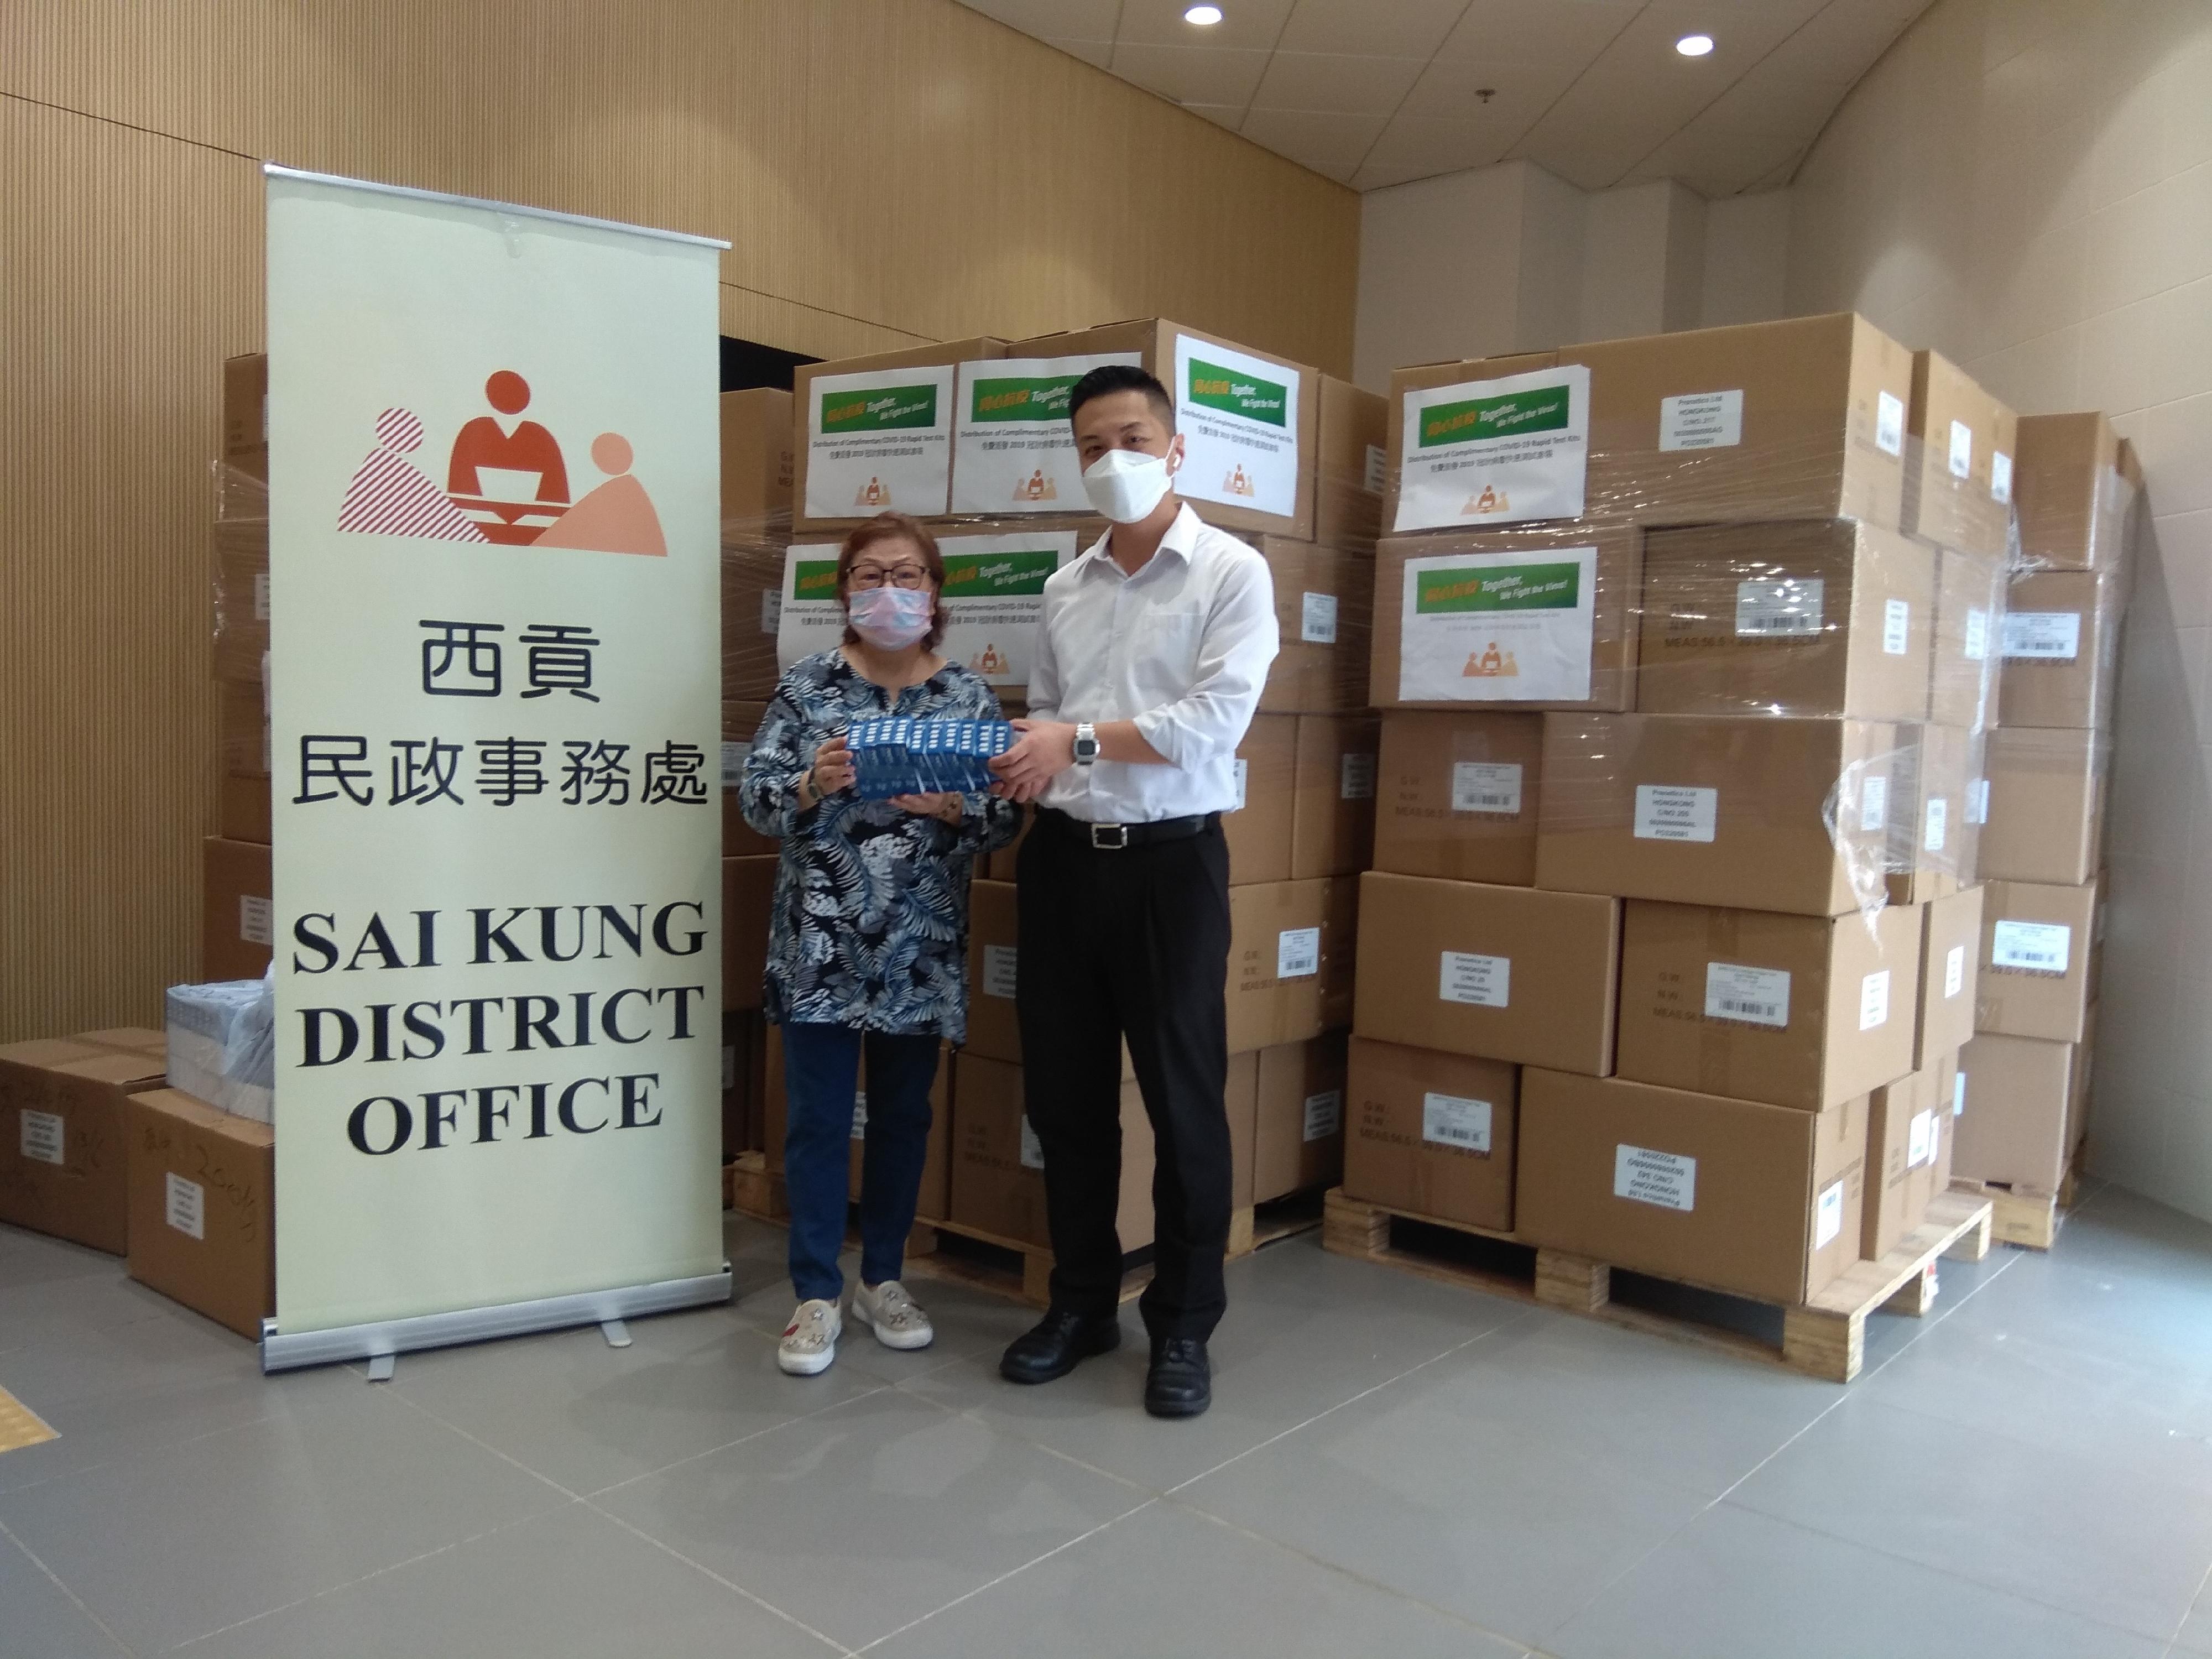 The Sai Kung District Office today (June 13) distributed COVID-19 rapid test kits to households, cleansing workers and property management staff living and working in Metro Town for voluntary testing through the property management company.